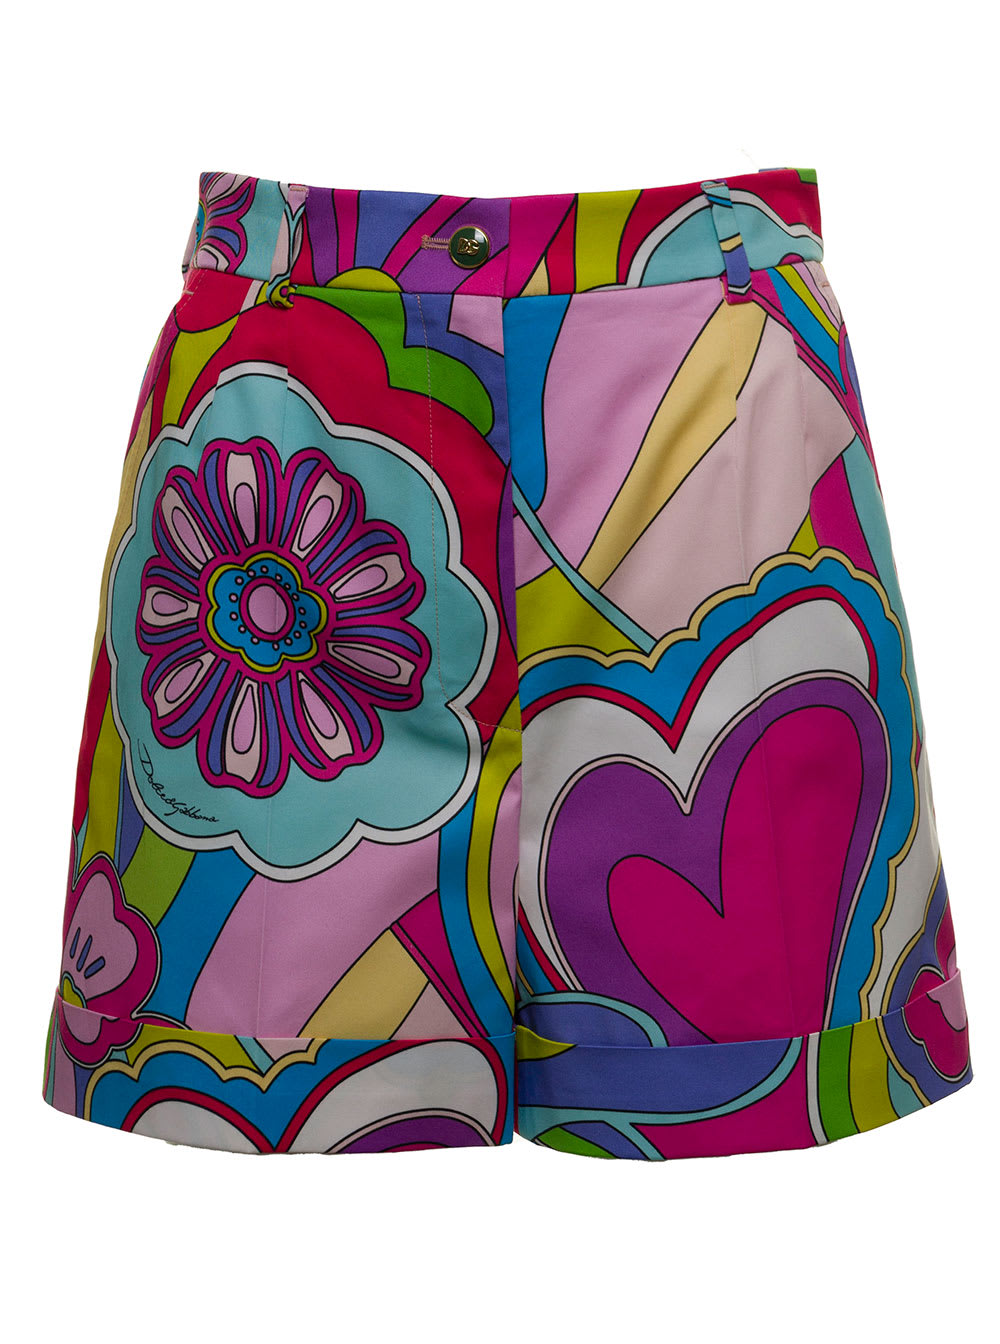 Dolce & Gabbana Multicolor Drill Shorts With Hearts And Flowers Print